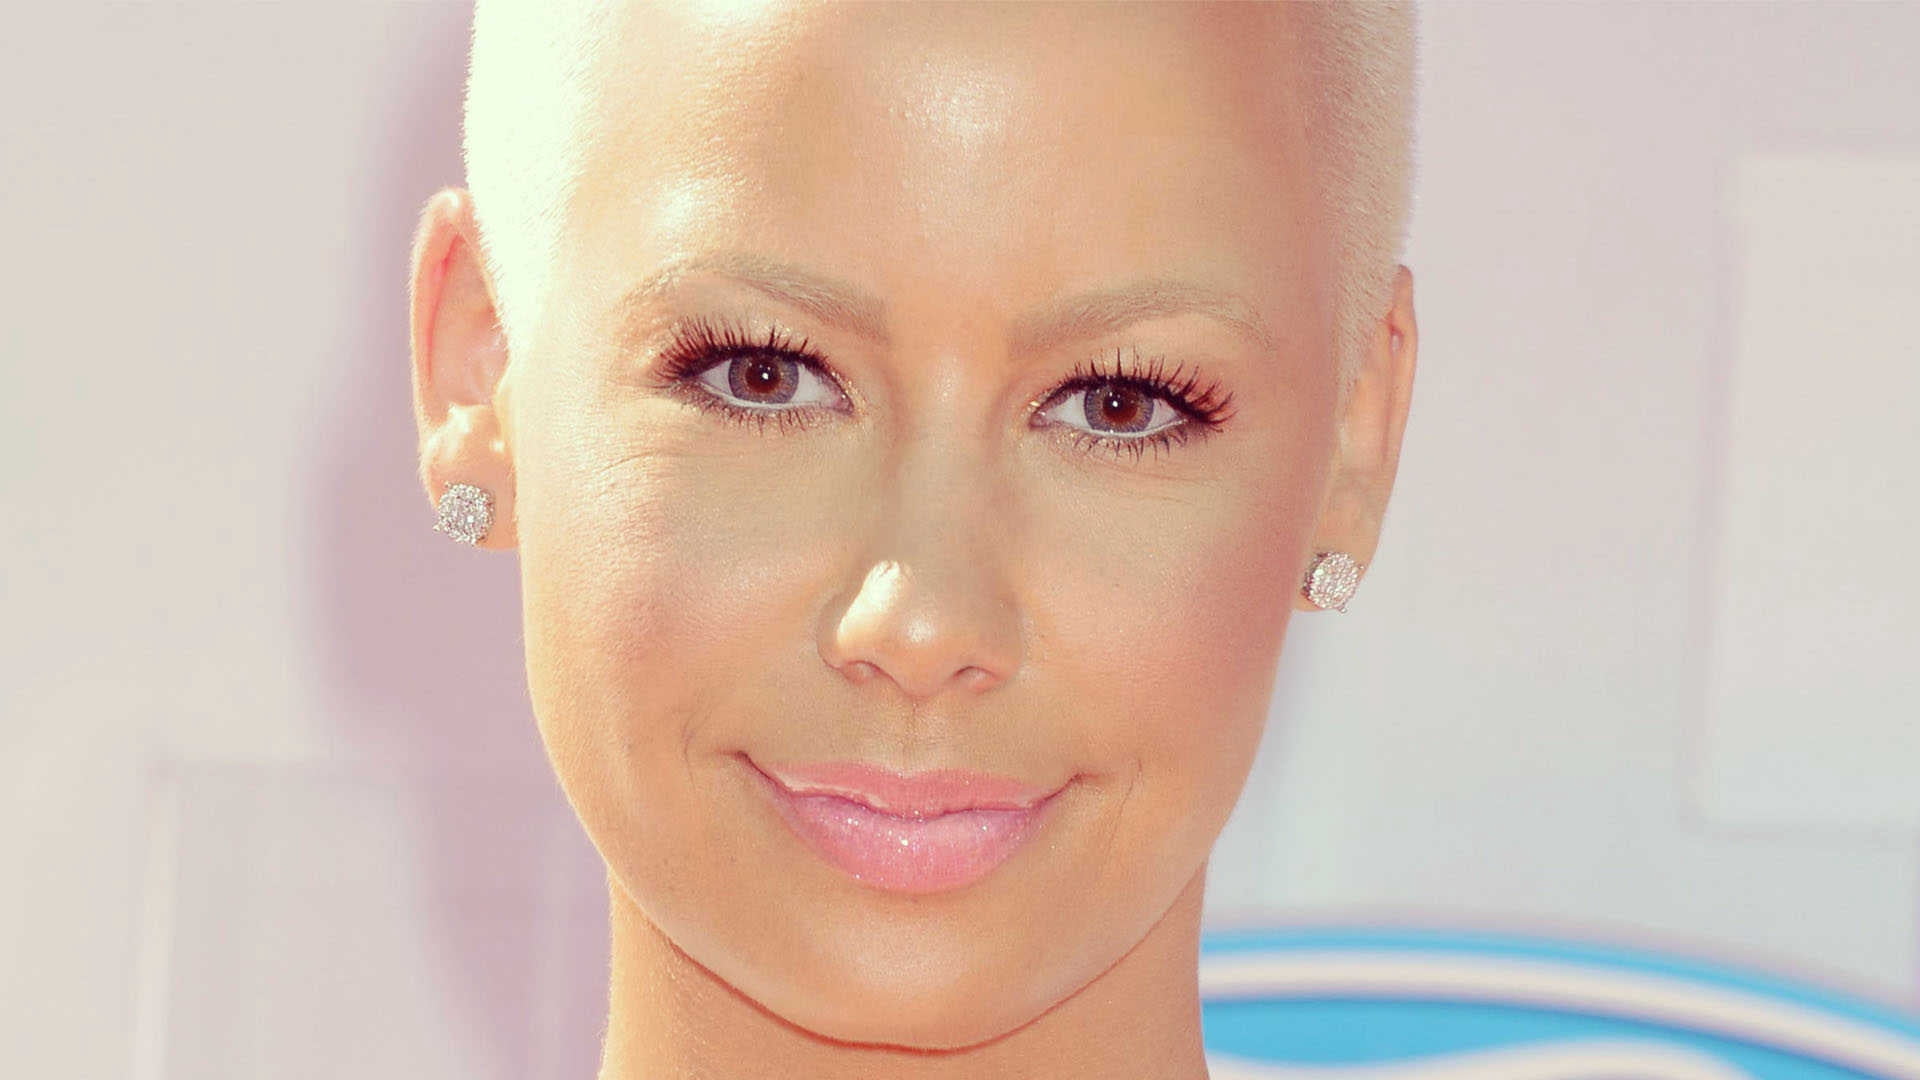 pair of silver-colored earrings, amber rose, face, celebrity